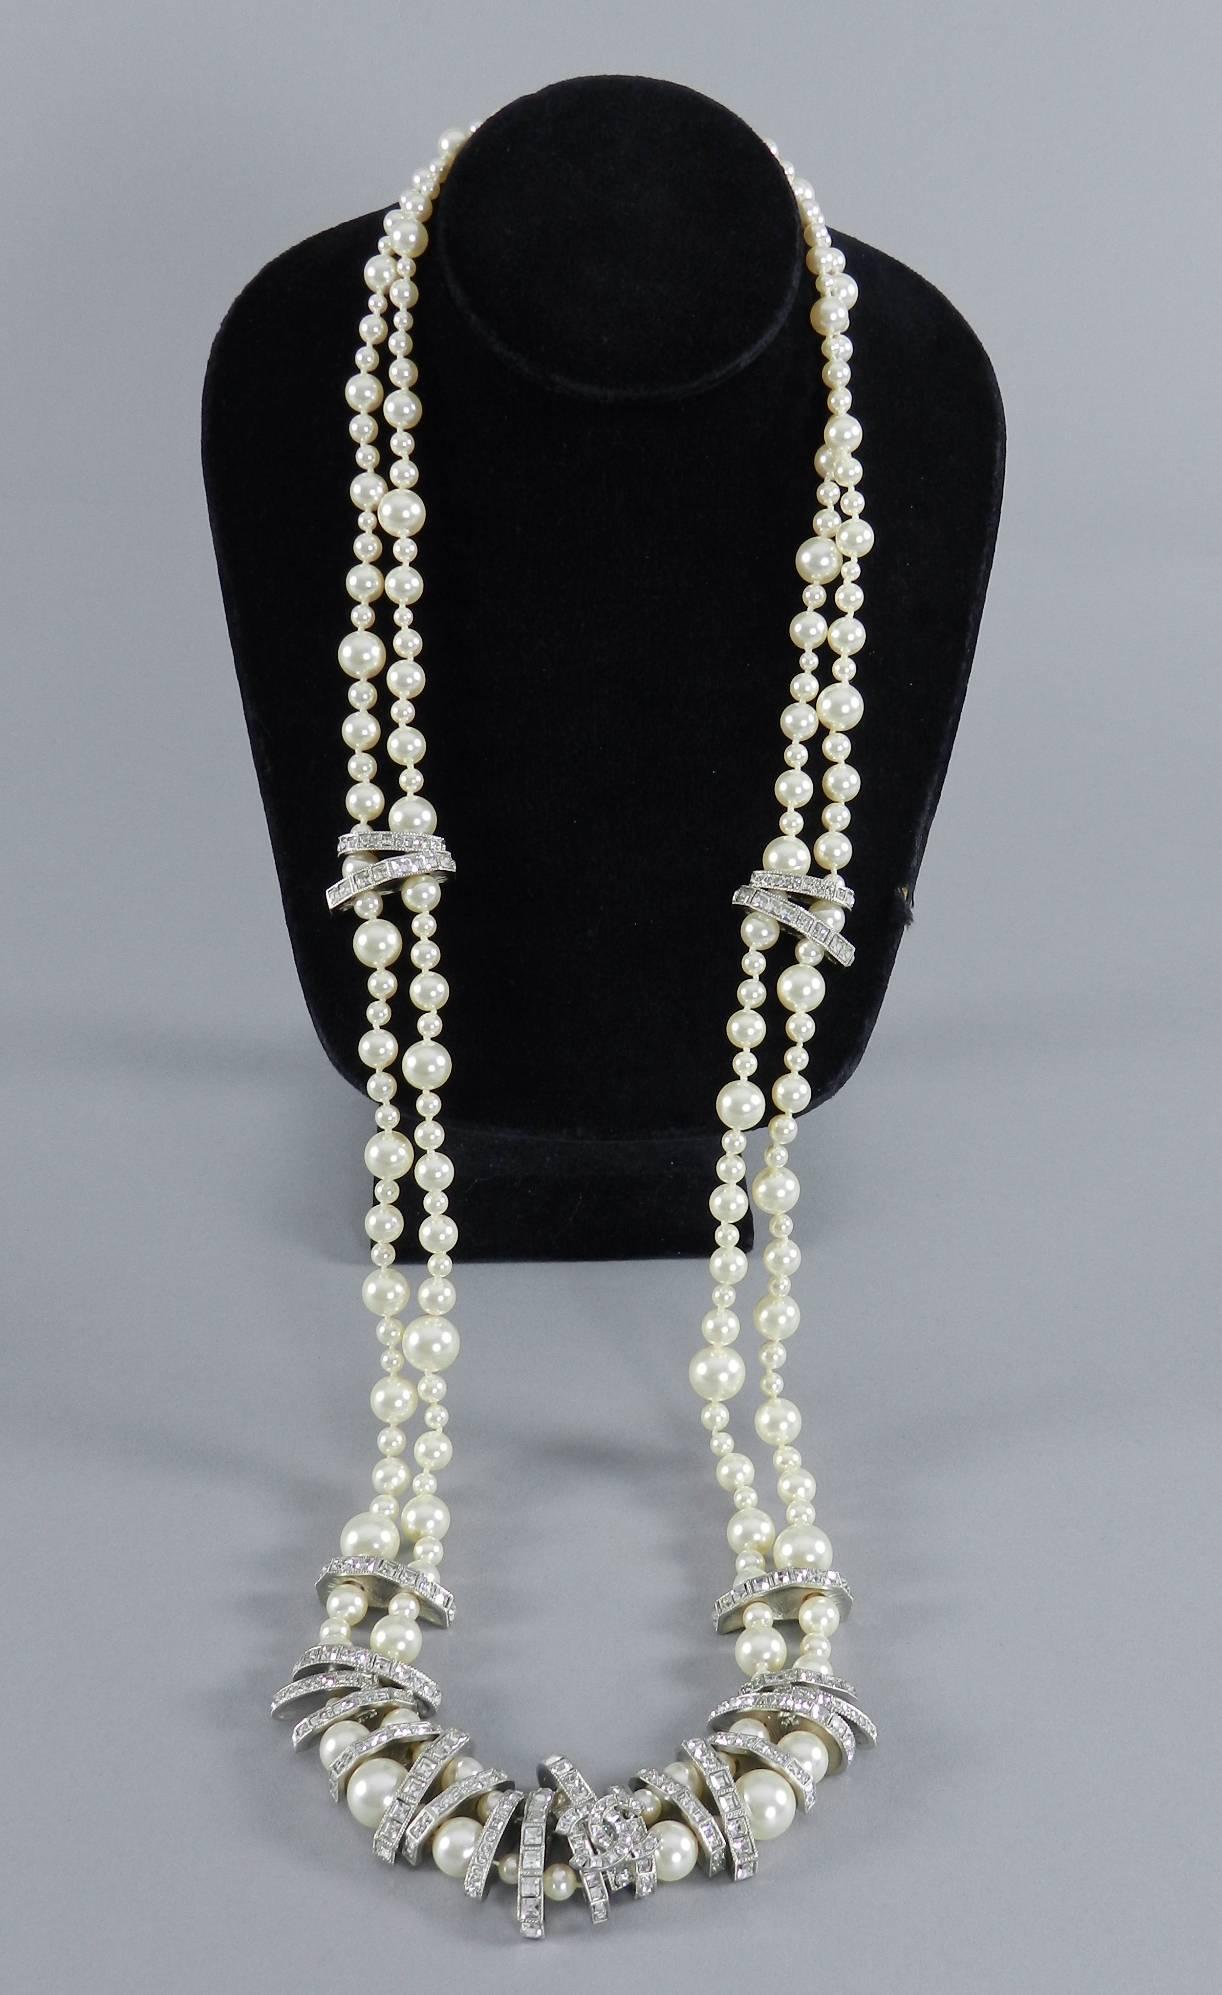 Chanel 15P long double strand pearl necklace with rhinestone spacers. Original box and black velvet pad. Excellent pre-owned condition - worn once if at all. Measures 33